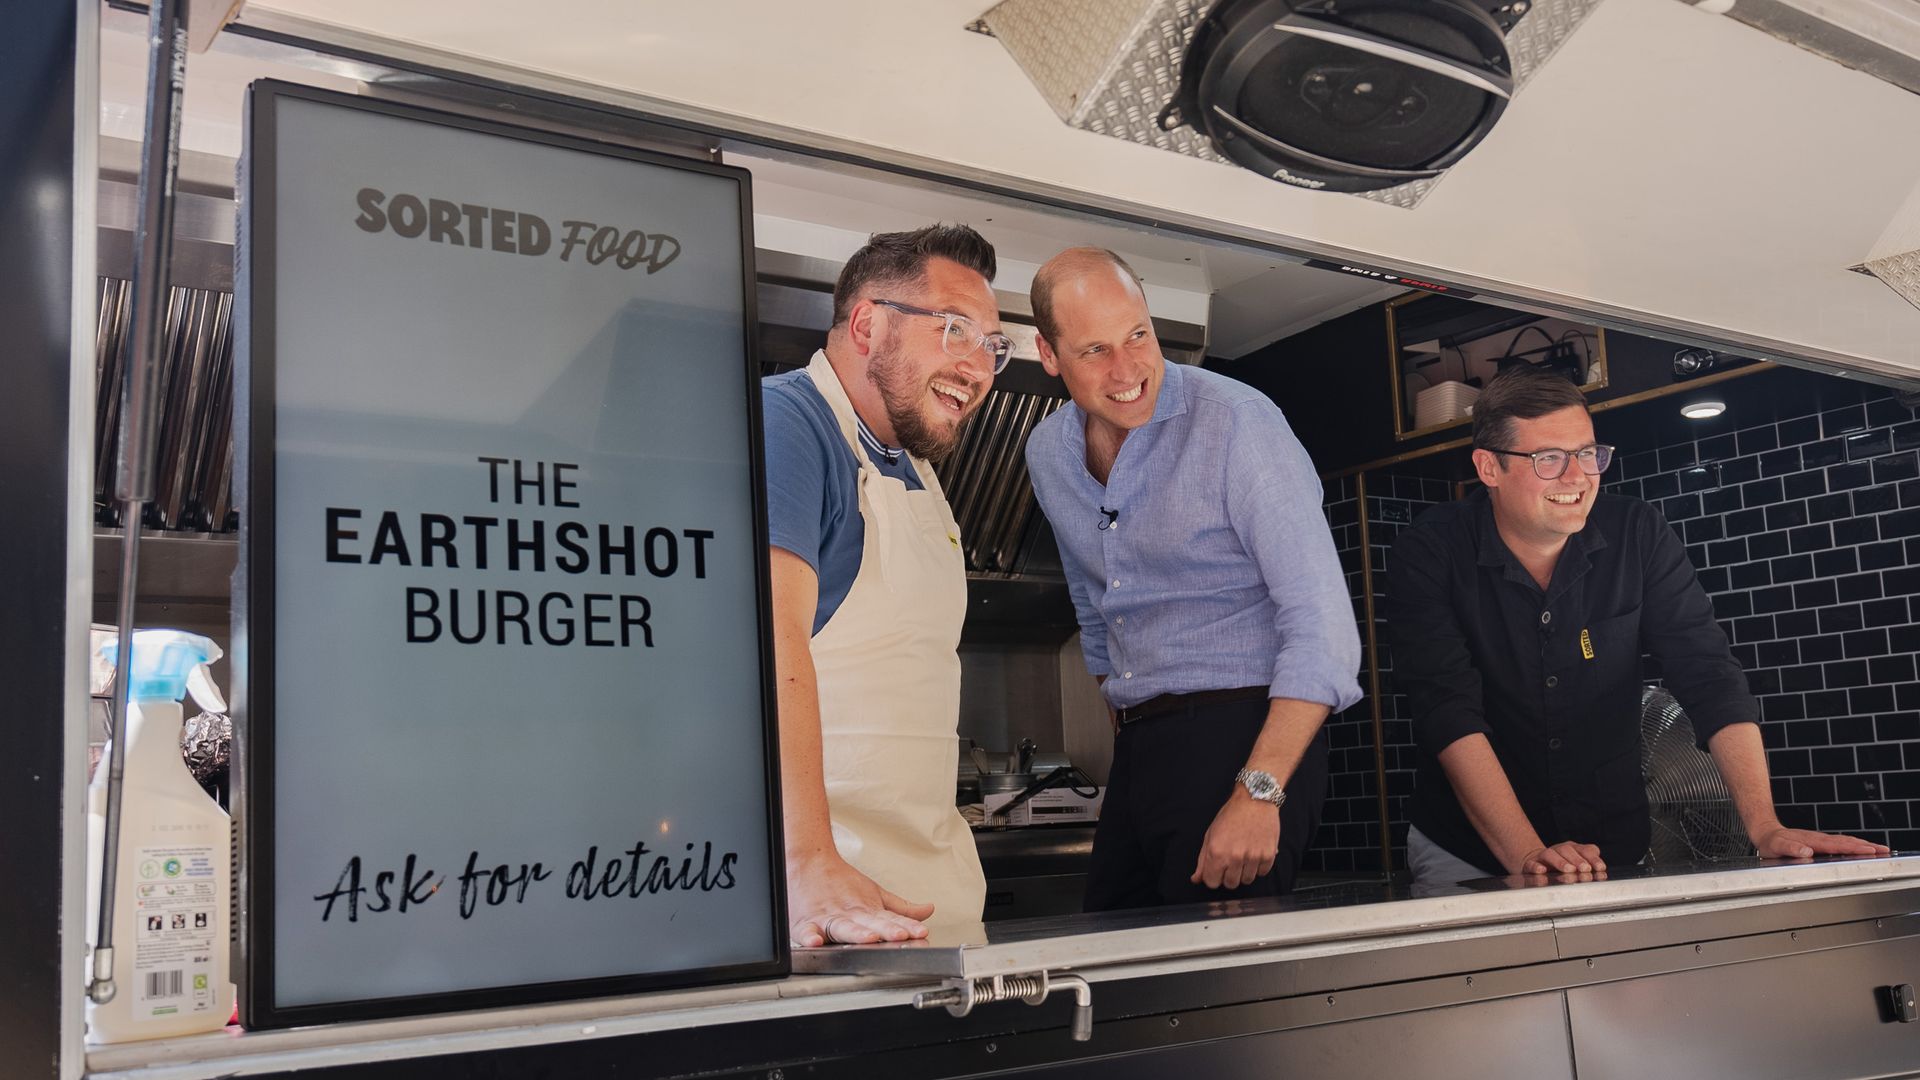 Prince William served up the Earthshot Burger to customers at Maltby Street Market